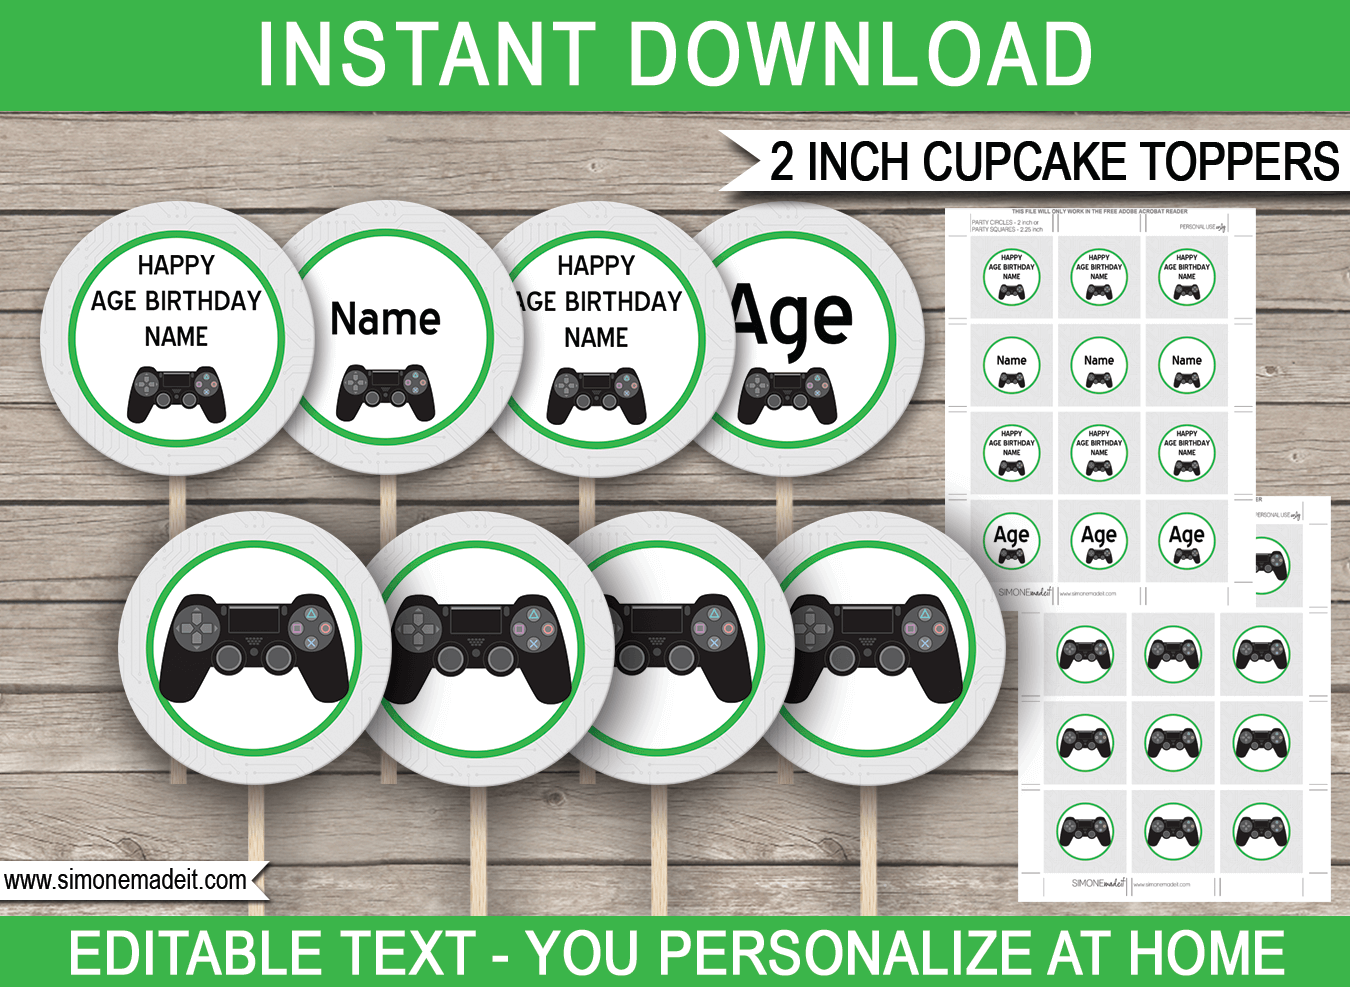 Printable Playstation Party Cupcake Toppers | Video Game Theme | 2 inch | Gift Tags | DIY Editable Template | INSTANT DOWNLOAD via simonemadeit.com